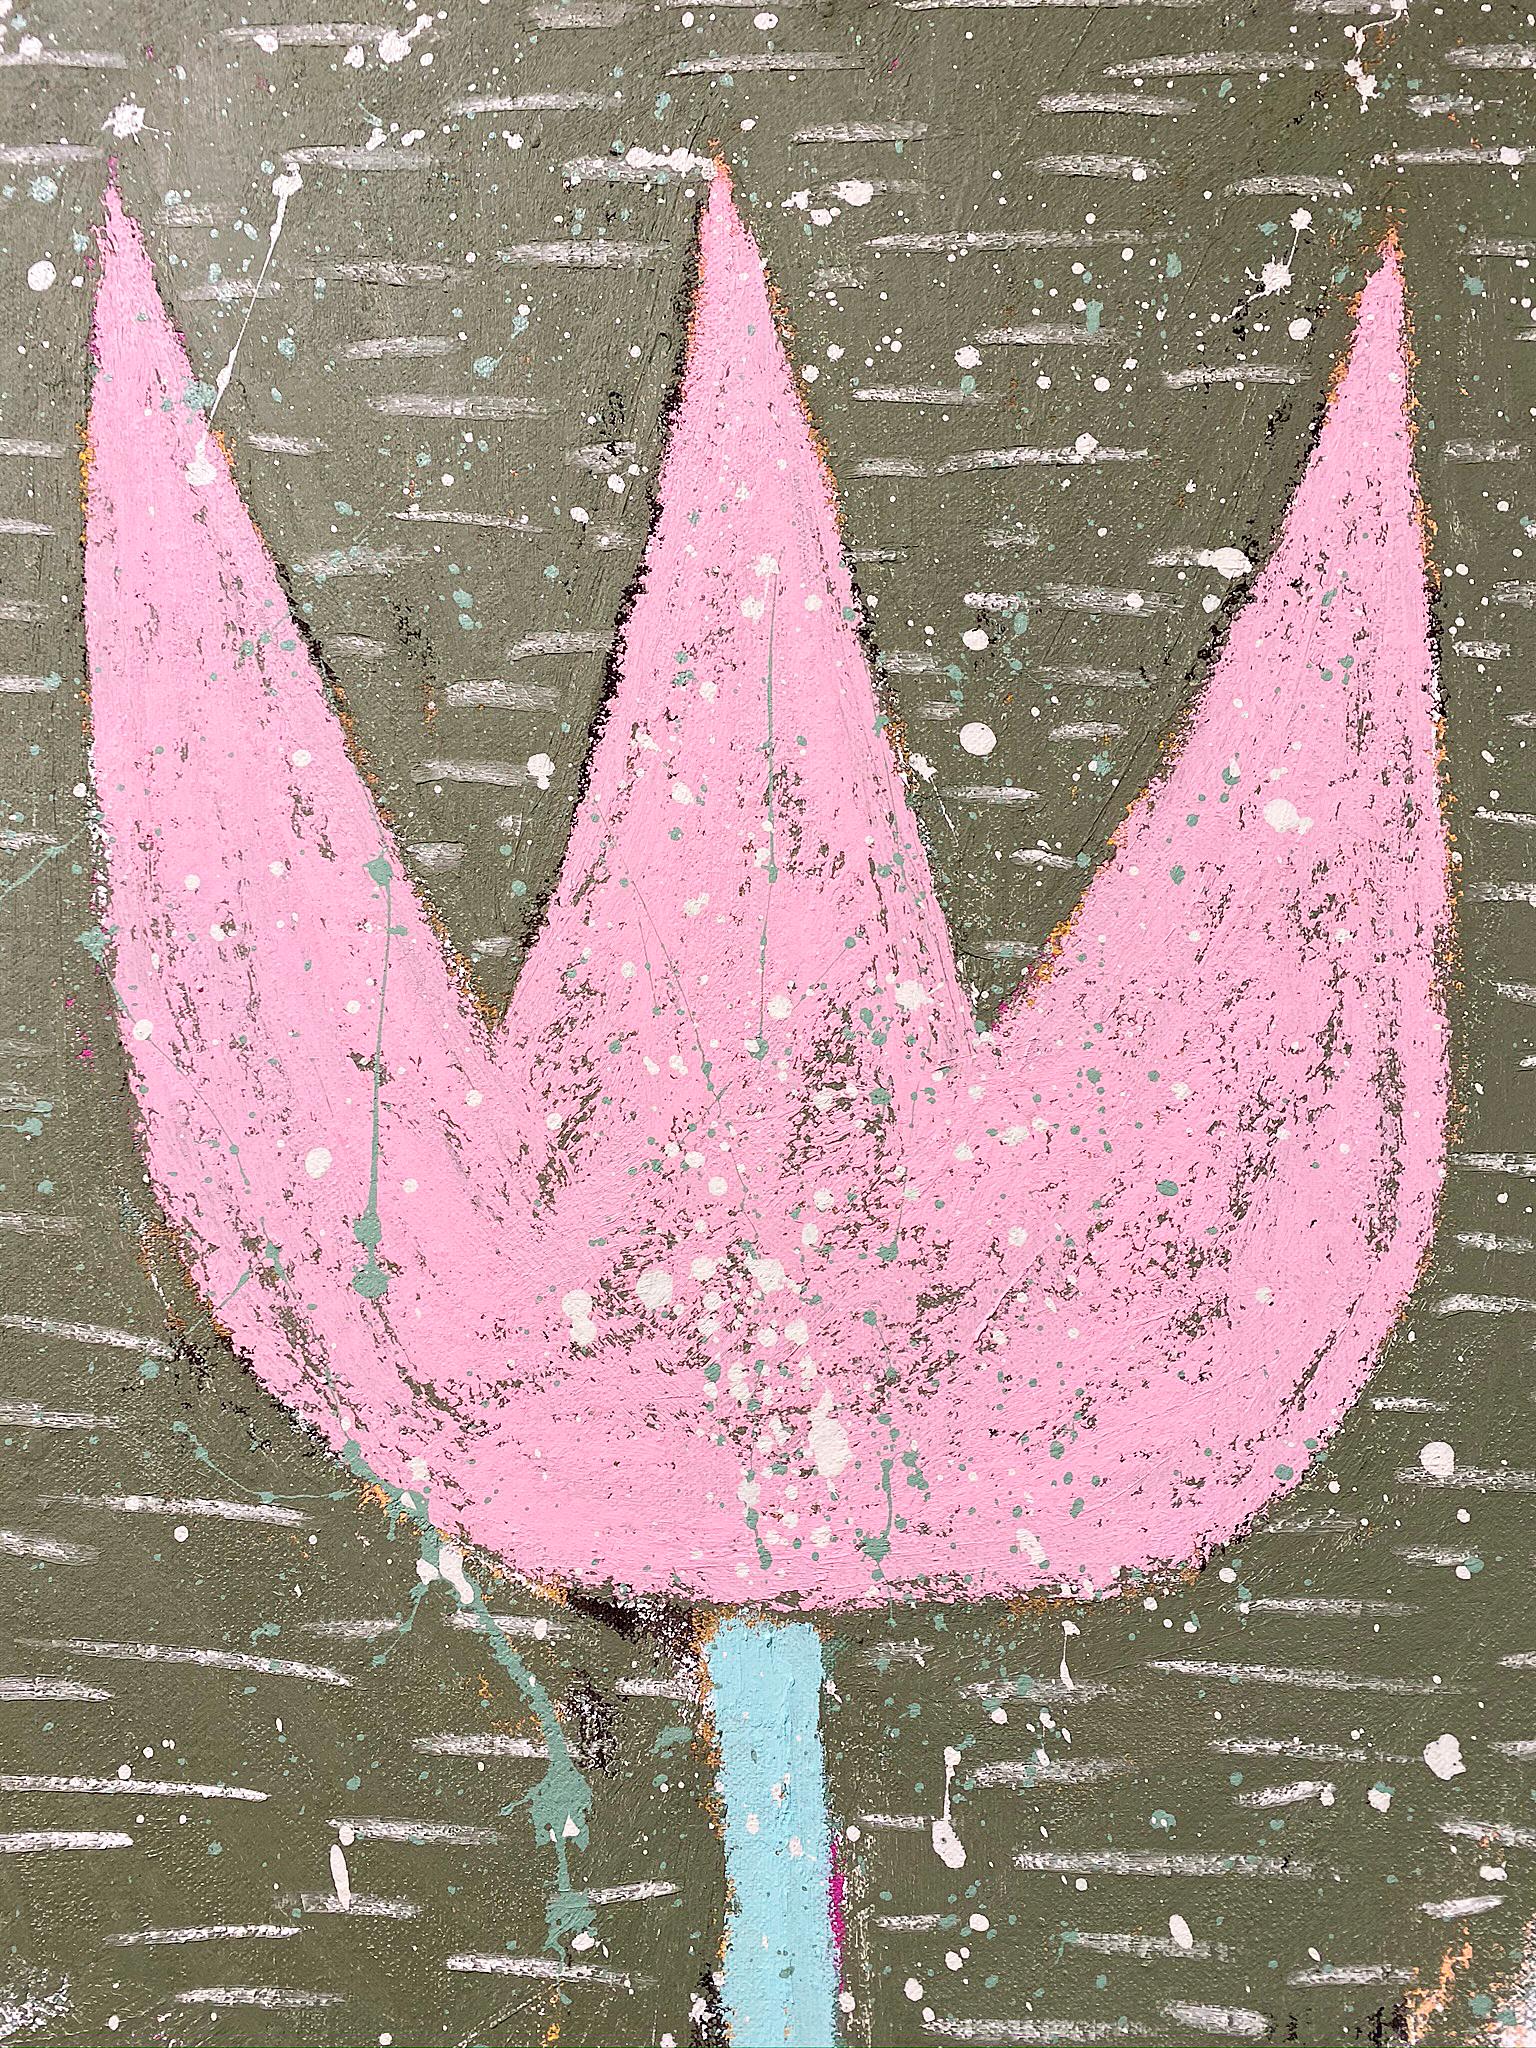 'Last Wood Tulip' by Adam Handler, 2019. Oil stick and acrylic on canvas, 32 x 24 in. This painting by contemporary artist, Adam Handler, depicts a pink tulip in his signature naive, child-like style. The tulip is contained within a green halo-like